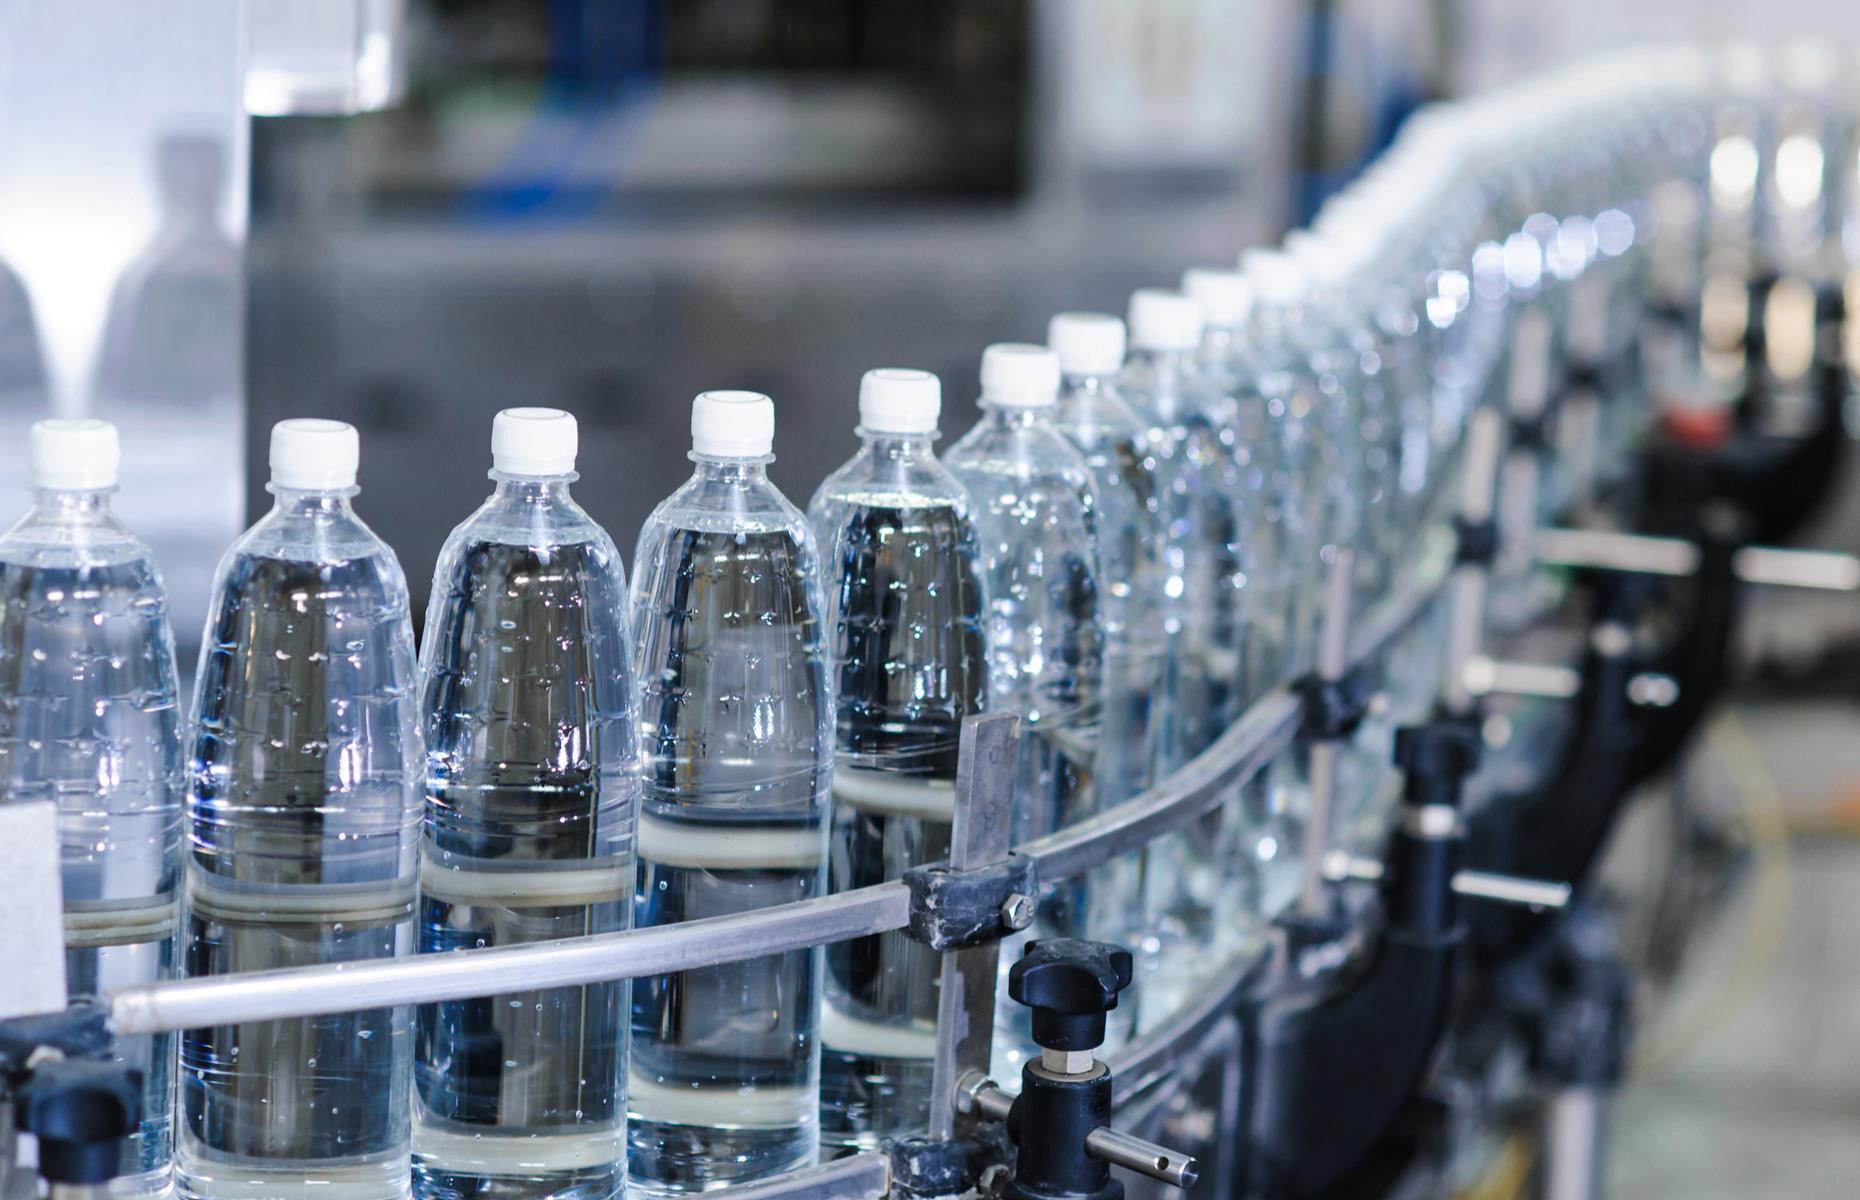 It takes a surprising amount of water to make plastic bottles